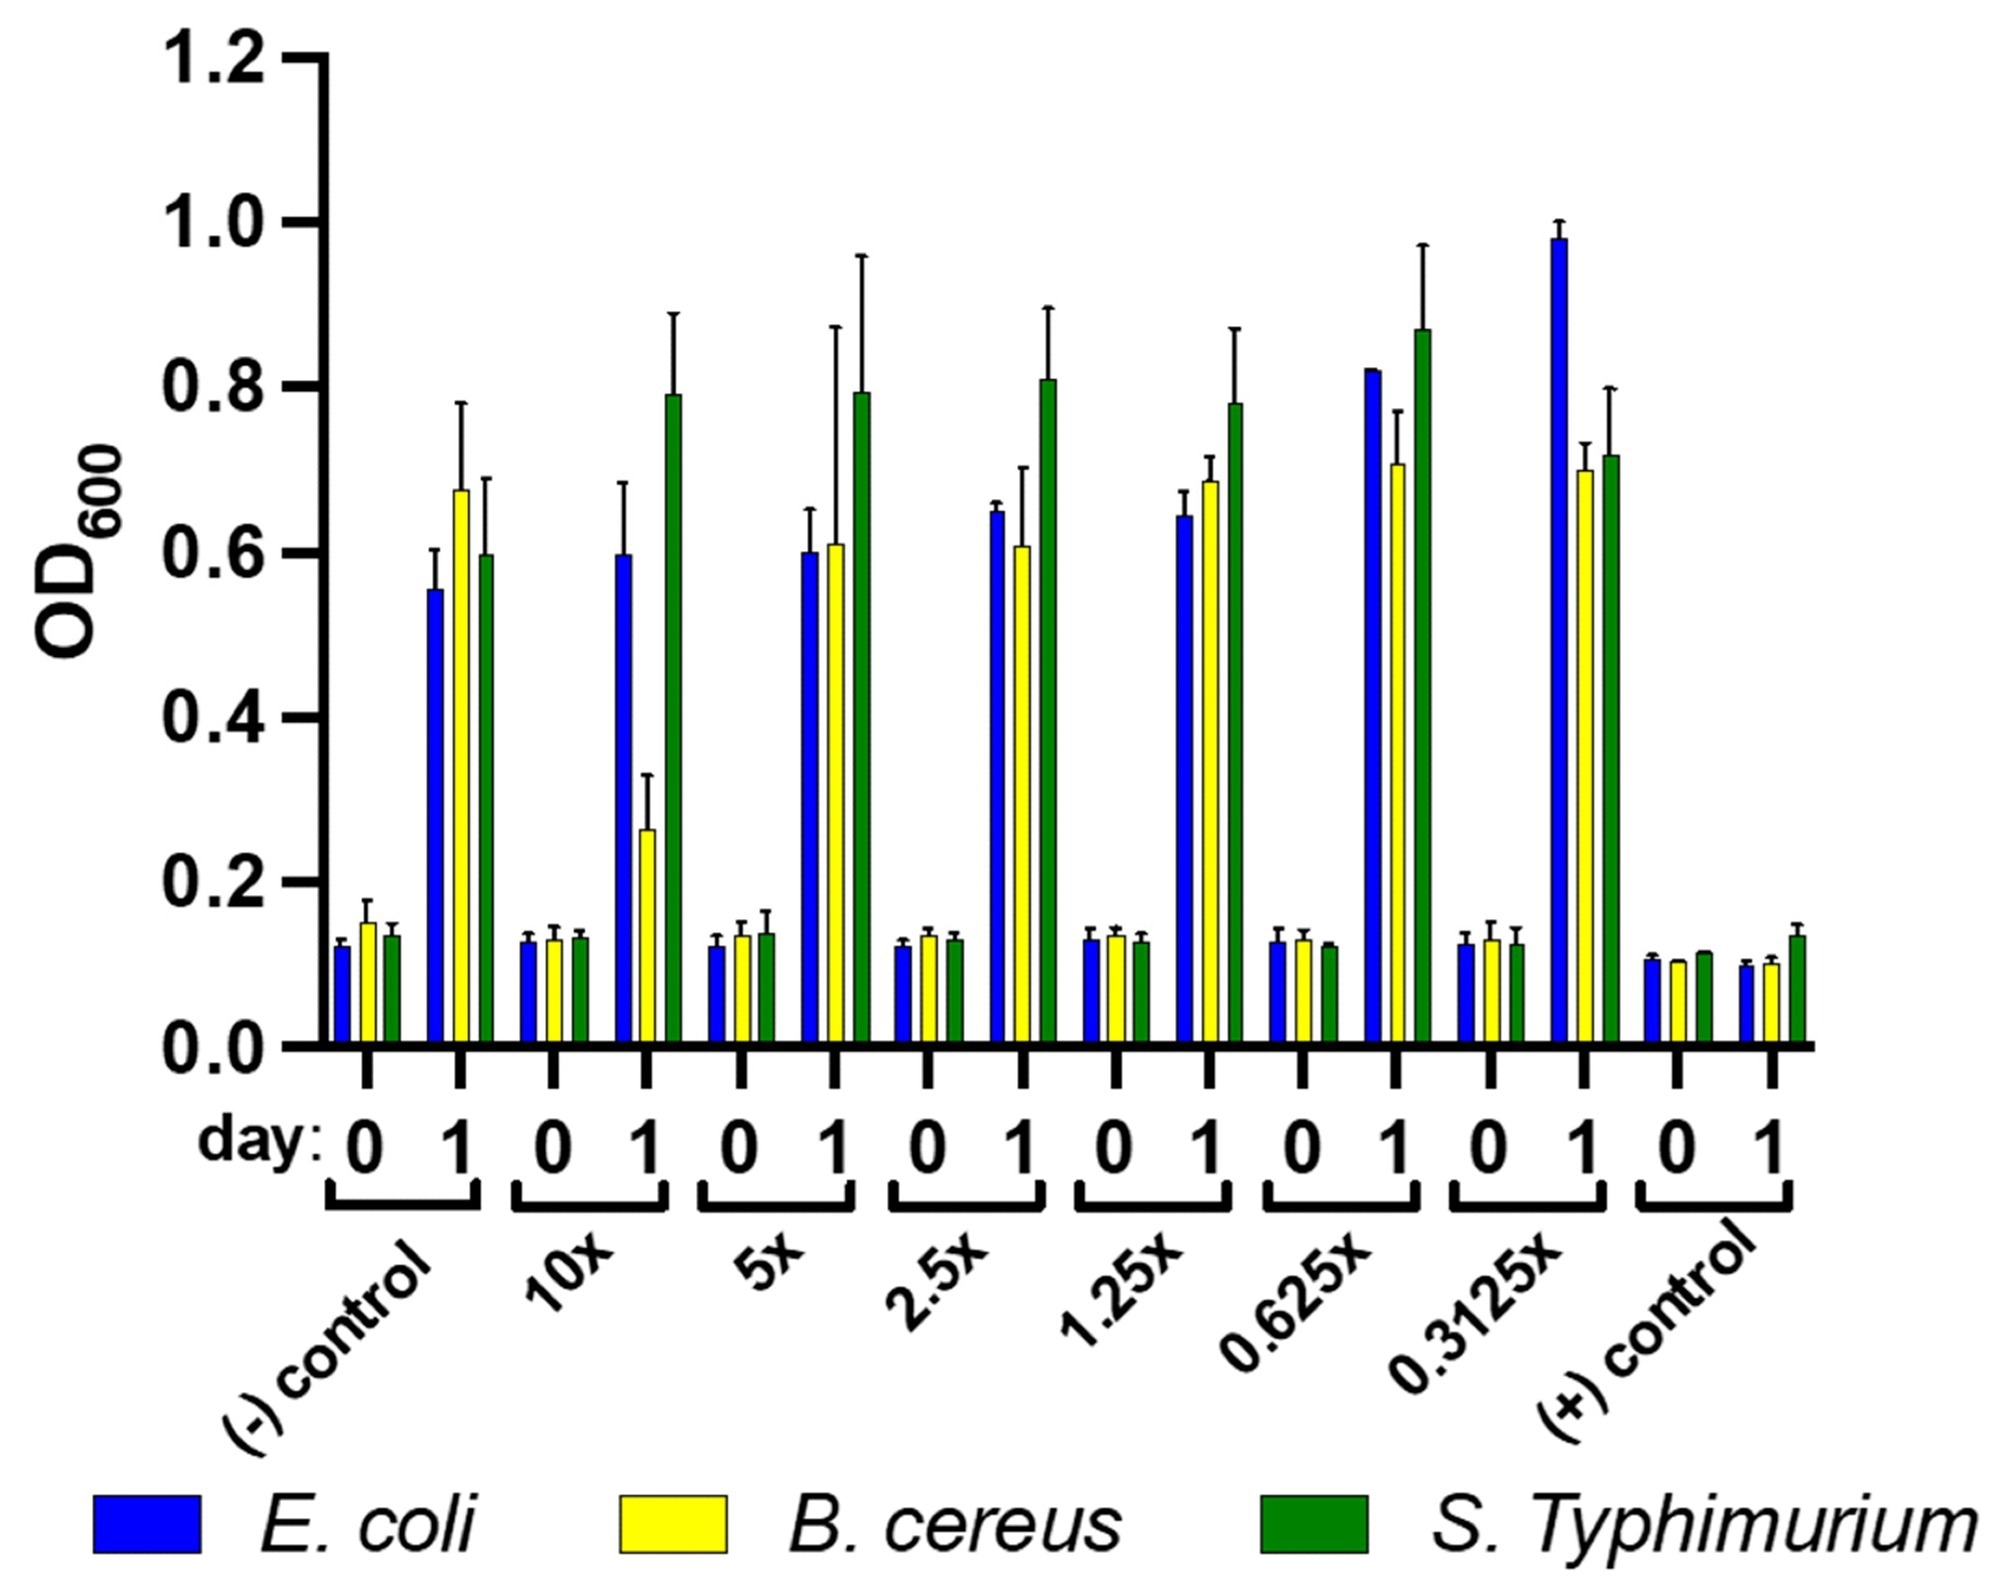 Antimicrobial properties of watermelon rind extract in 96-well plates at concentrations from 10–0.3125% against B. cereus, E. coli, and S. enterica subsp. enterica serovar Typhimurium when incubated at 37 °C for 24 h. The growth was monitored at OD600 using a microplate reader spectrophotometer. The error bars indicate the standard deviation (n = 3).